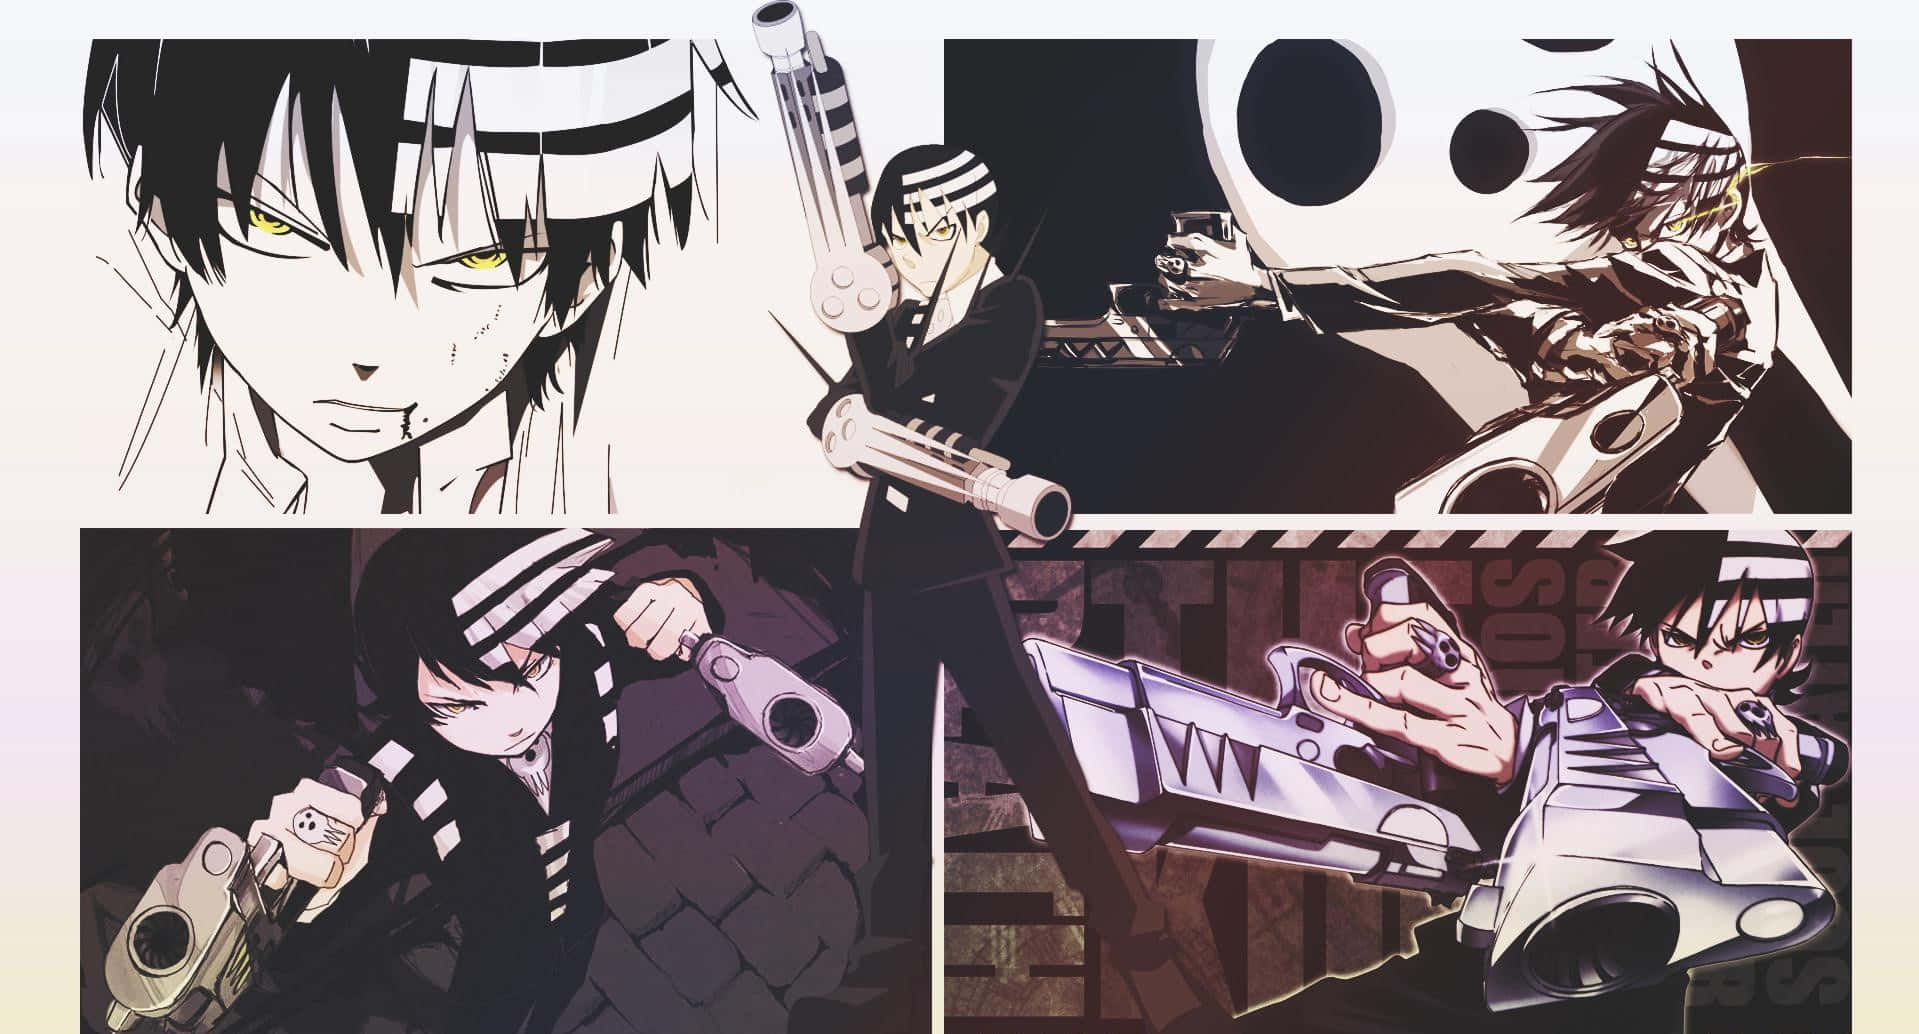 Symmetry And Power - Soul Eater Death The Kid In Action Wallpaper